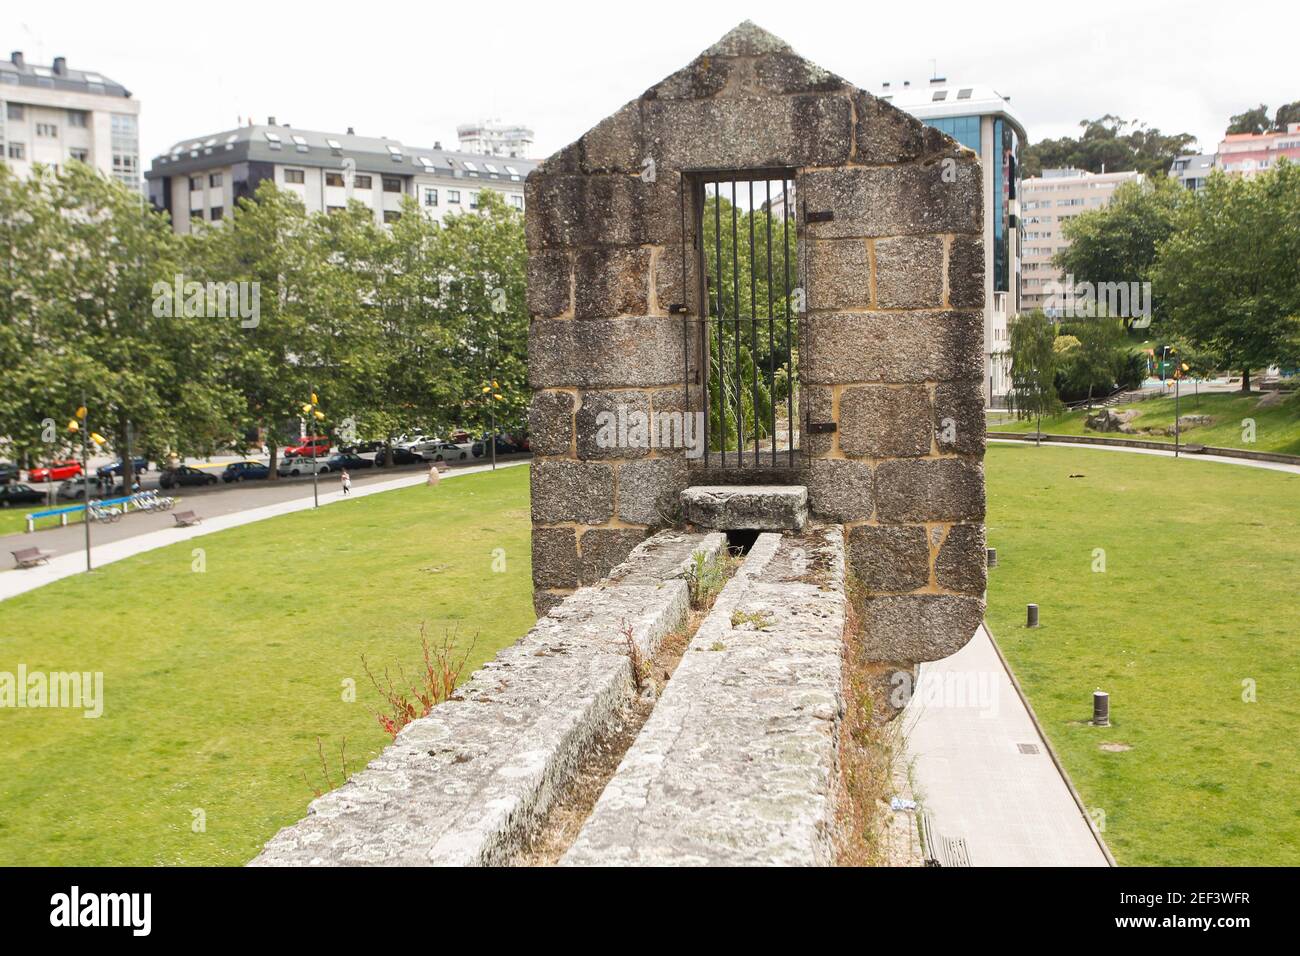 Old stone aqueduct that is part of the Walk of the bridges park in A Coruña, Spain Stock Photo